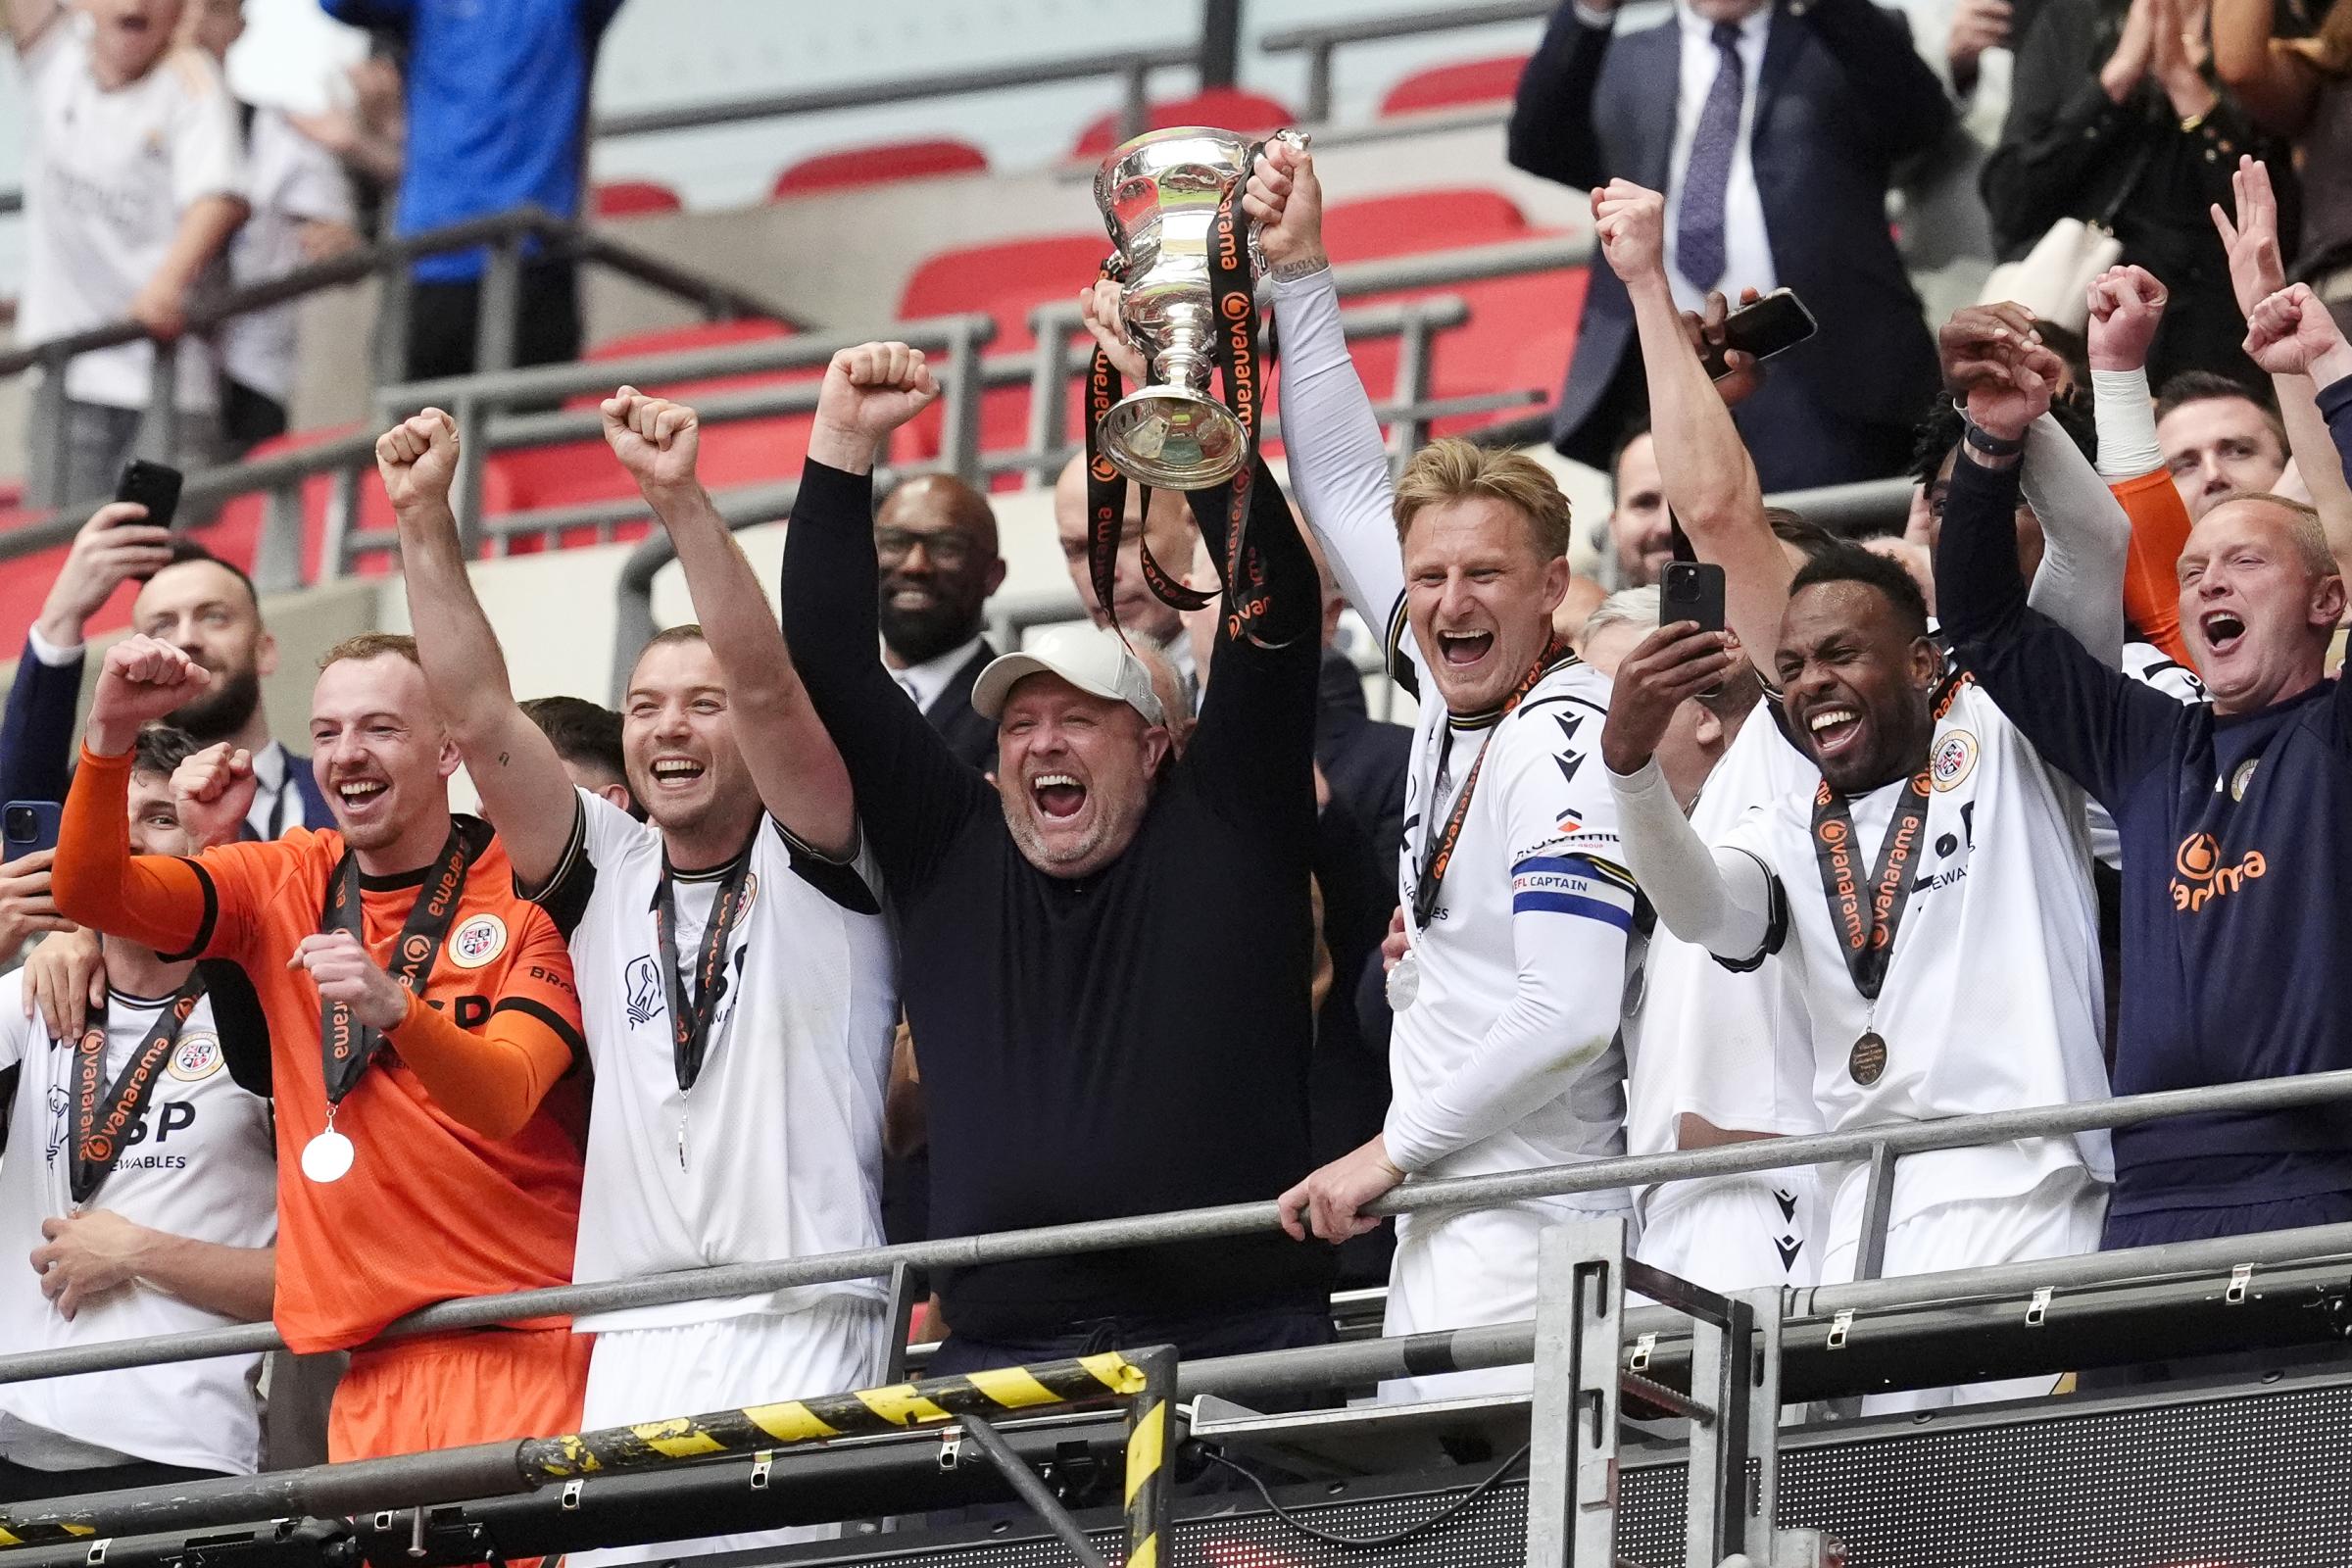 Bromley beat Solihull Moors to seal promotion to Football League